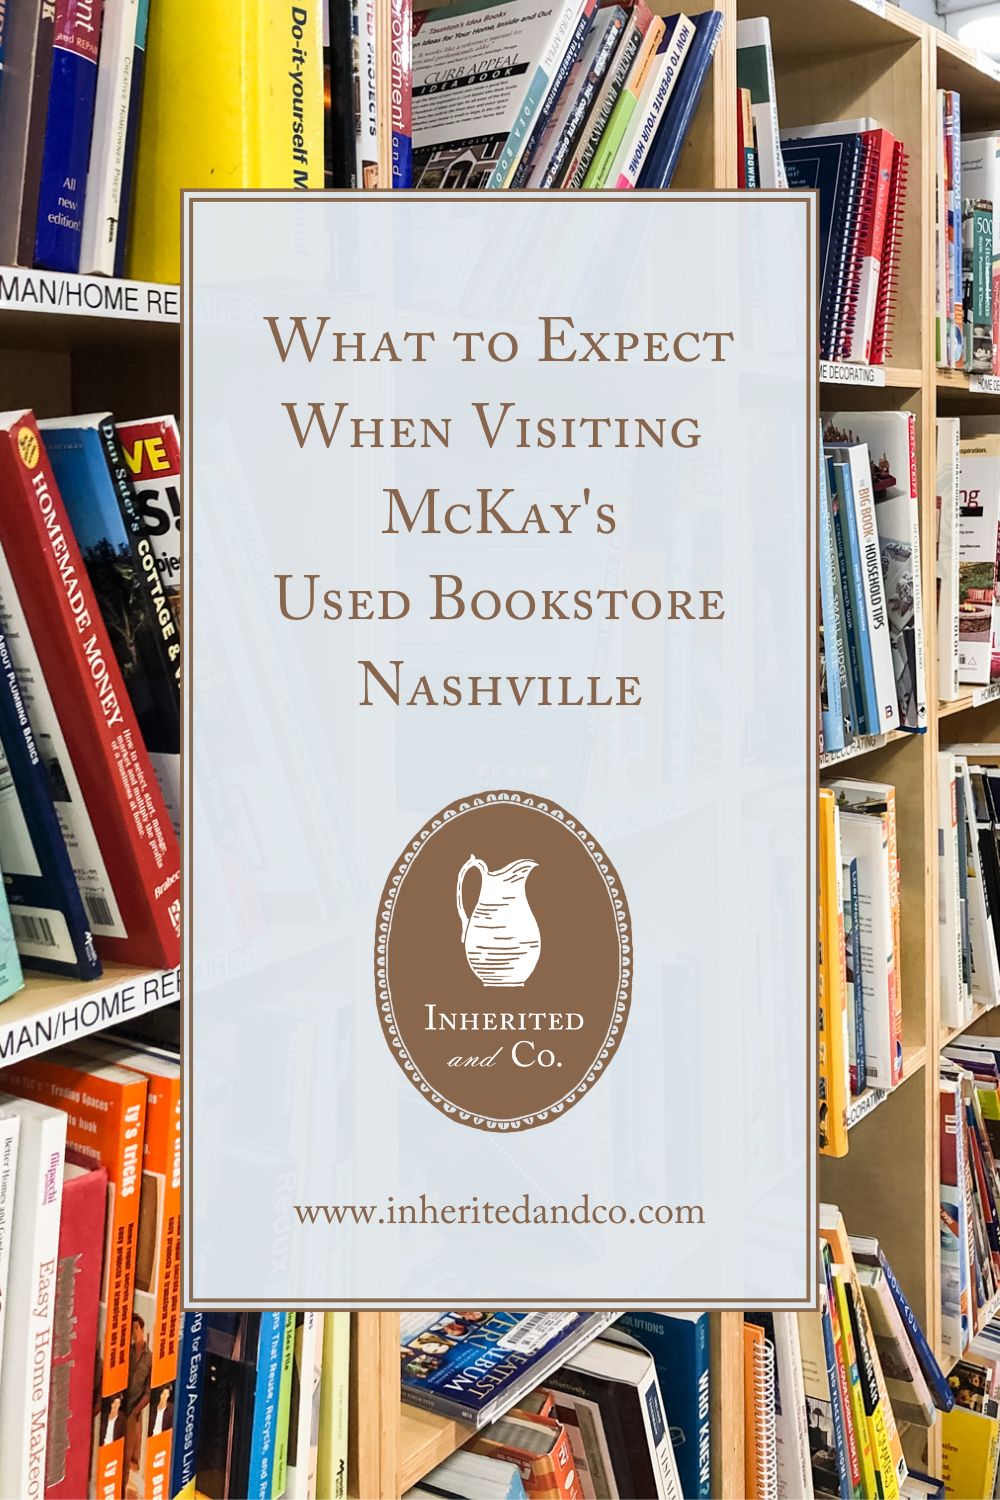 Bookshelves overlayed with a graphic that reads "What to Expect When Visiting McKay's Used Bookstore Nashville"